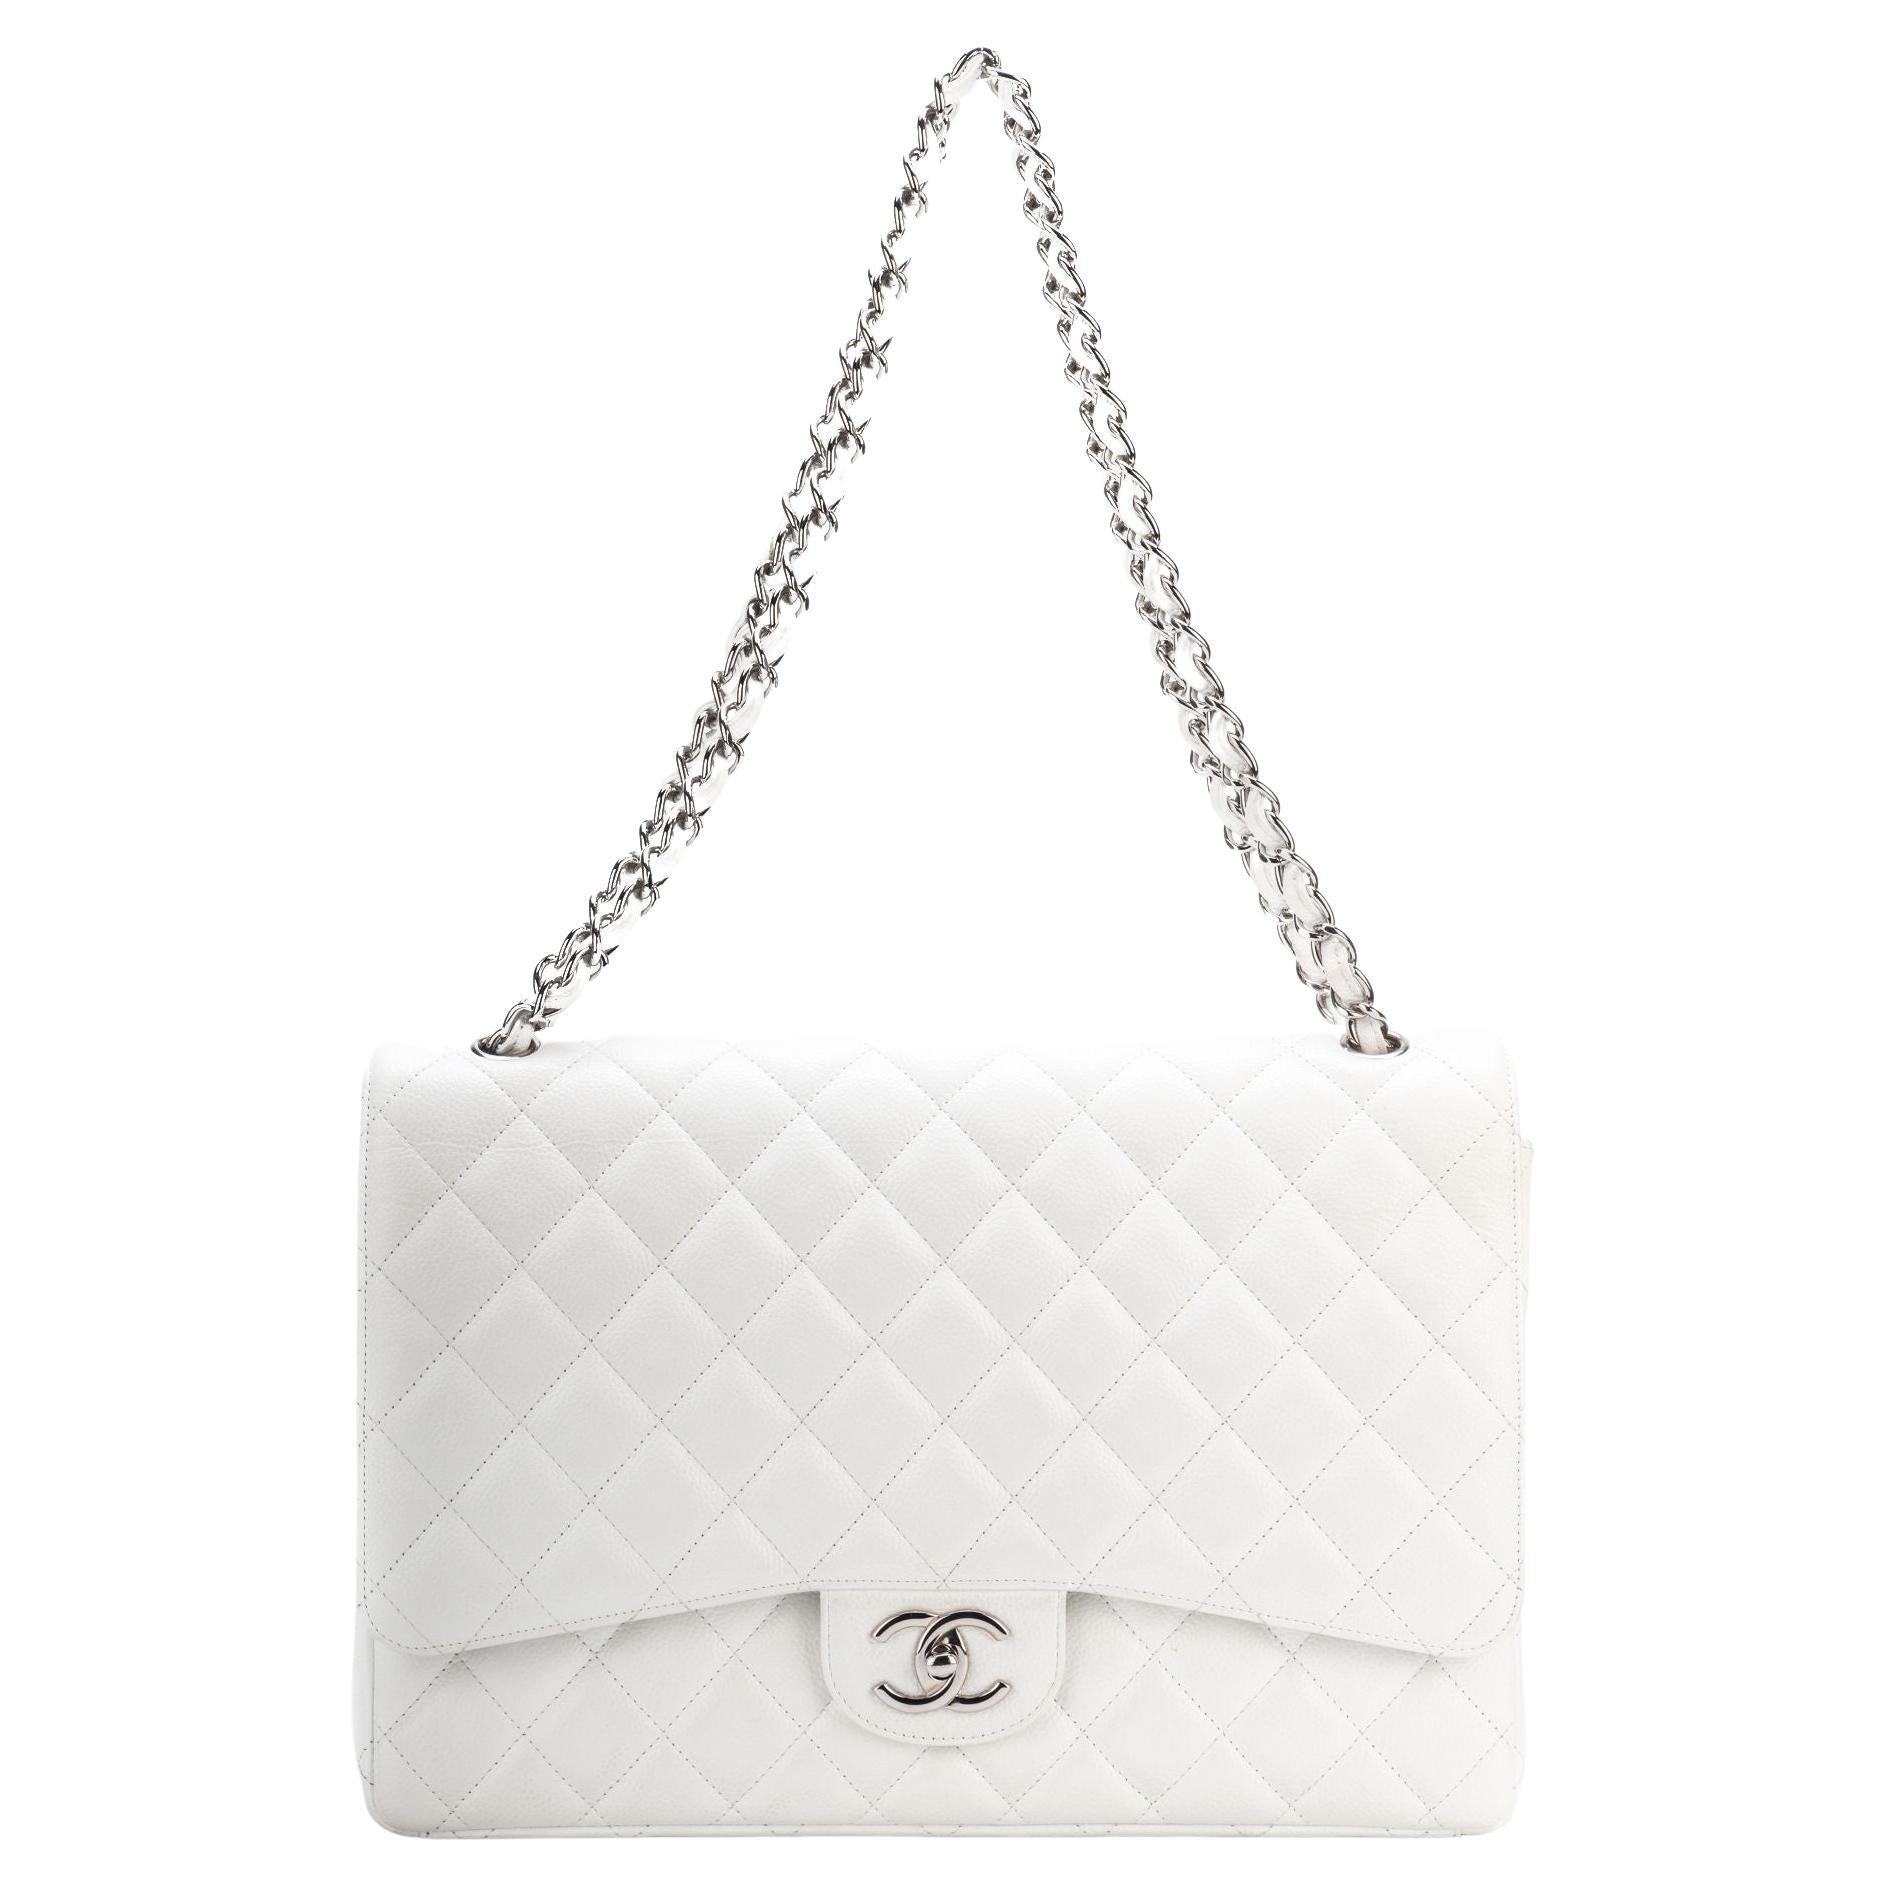 Chanel Flap Bag White - 133 For Sale on 1stDibs